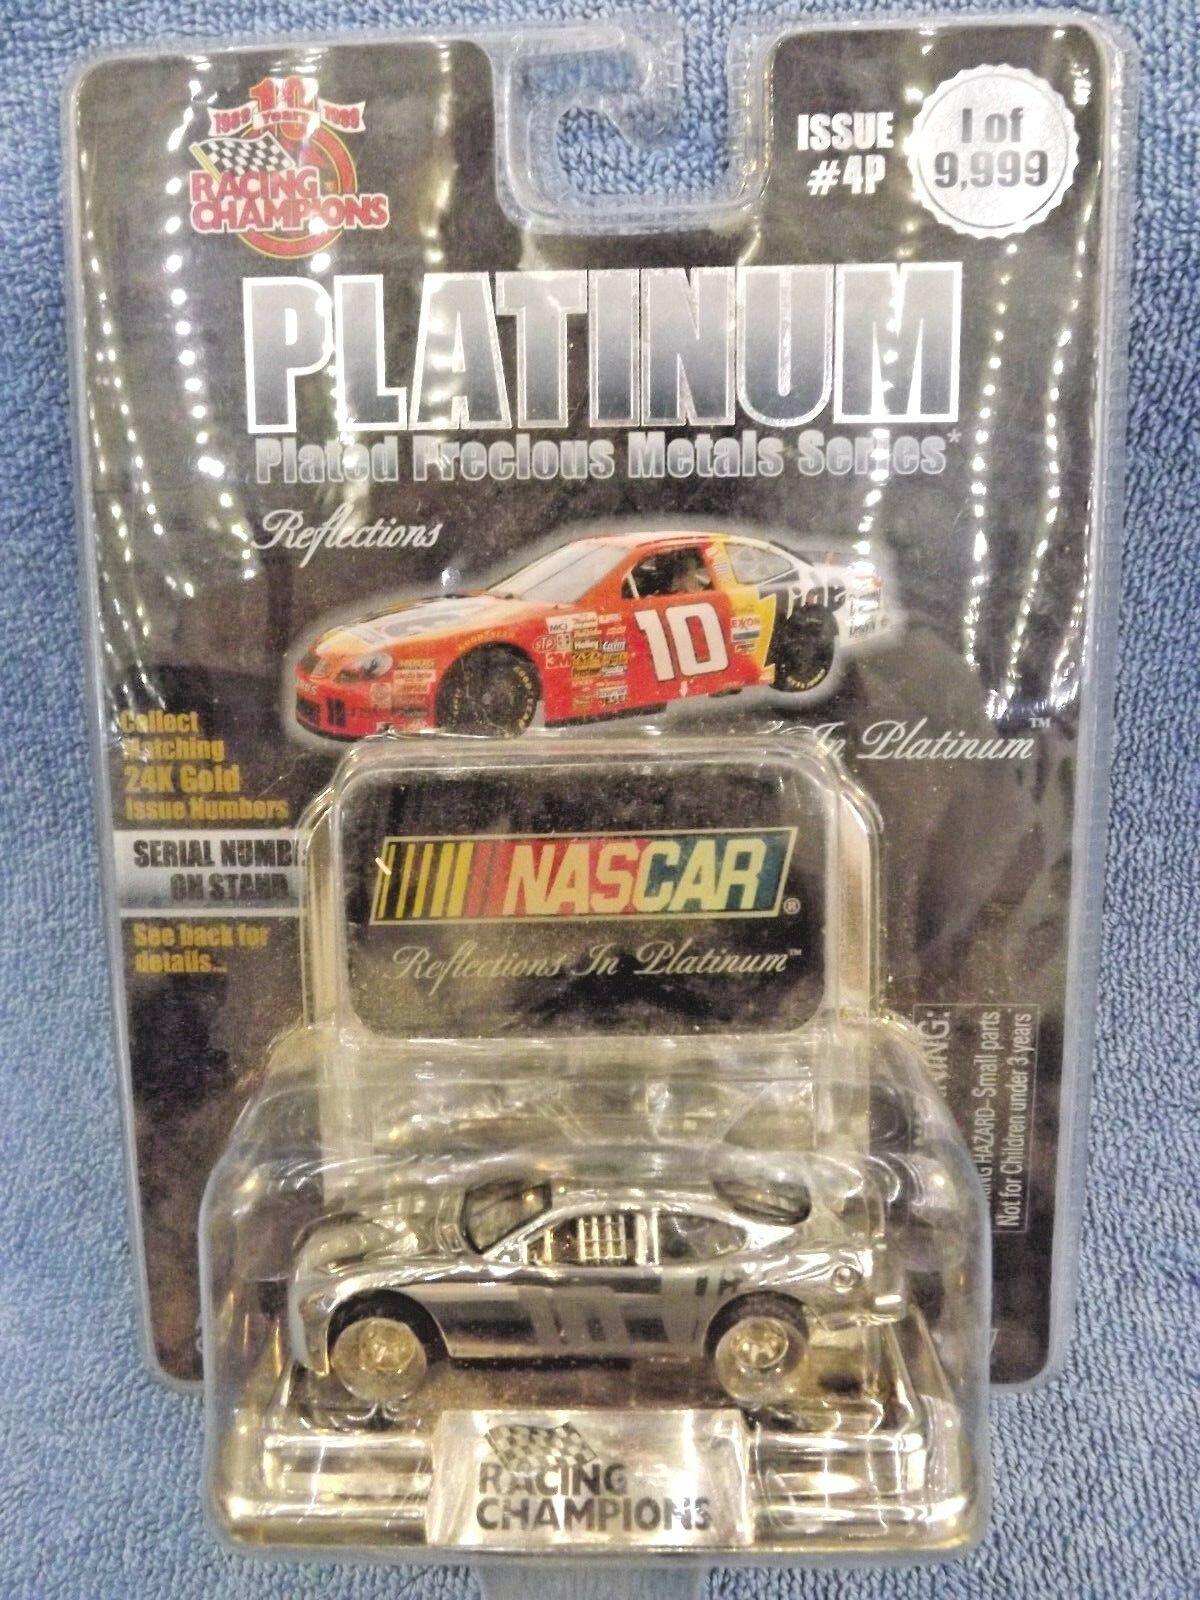 NASCAR Racing Champions 24k Gold Plated Precious Metals Series 1 of 4 999 for sale online 